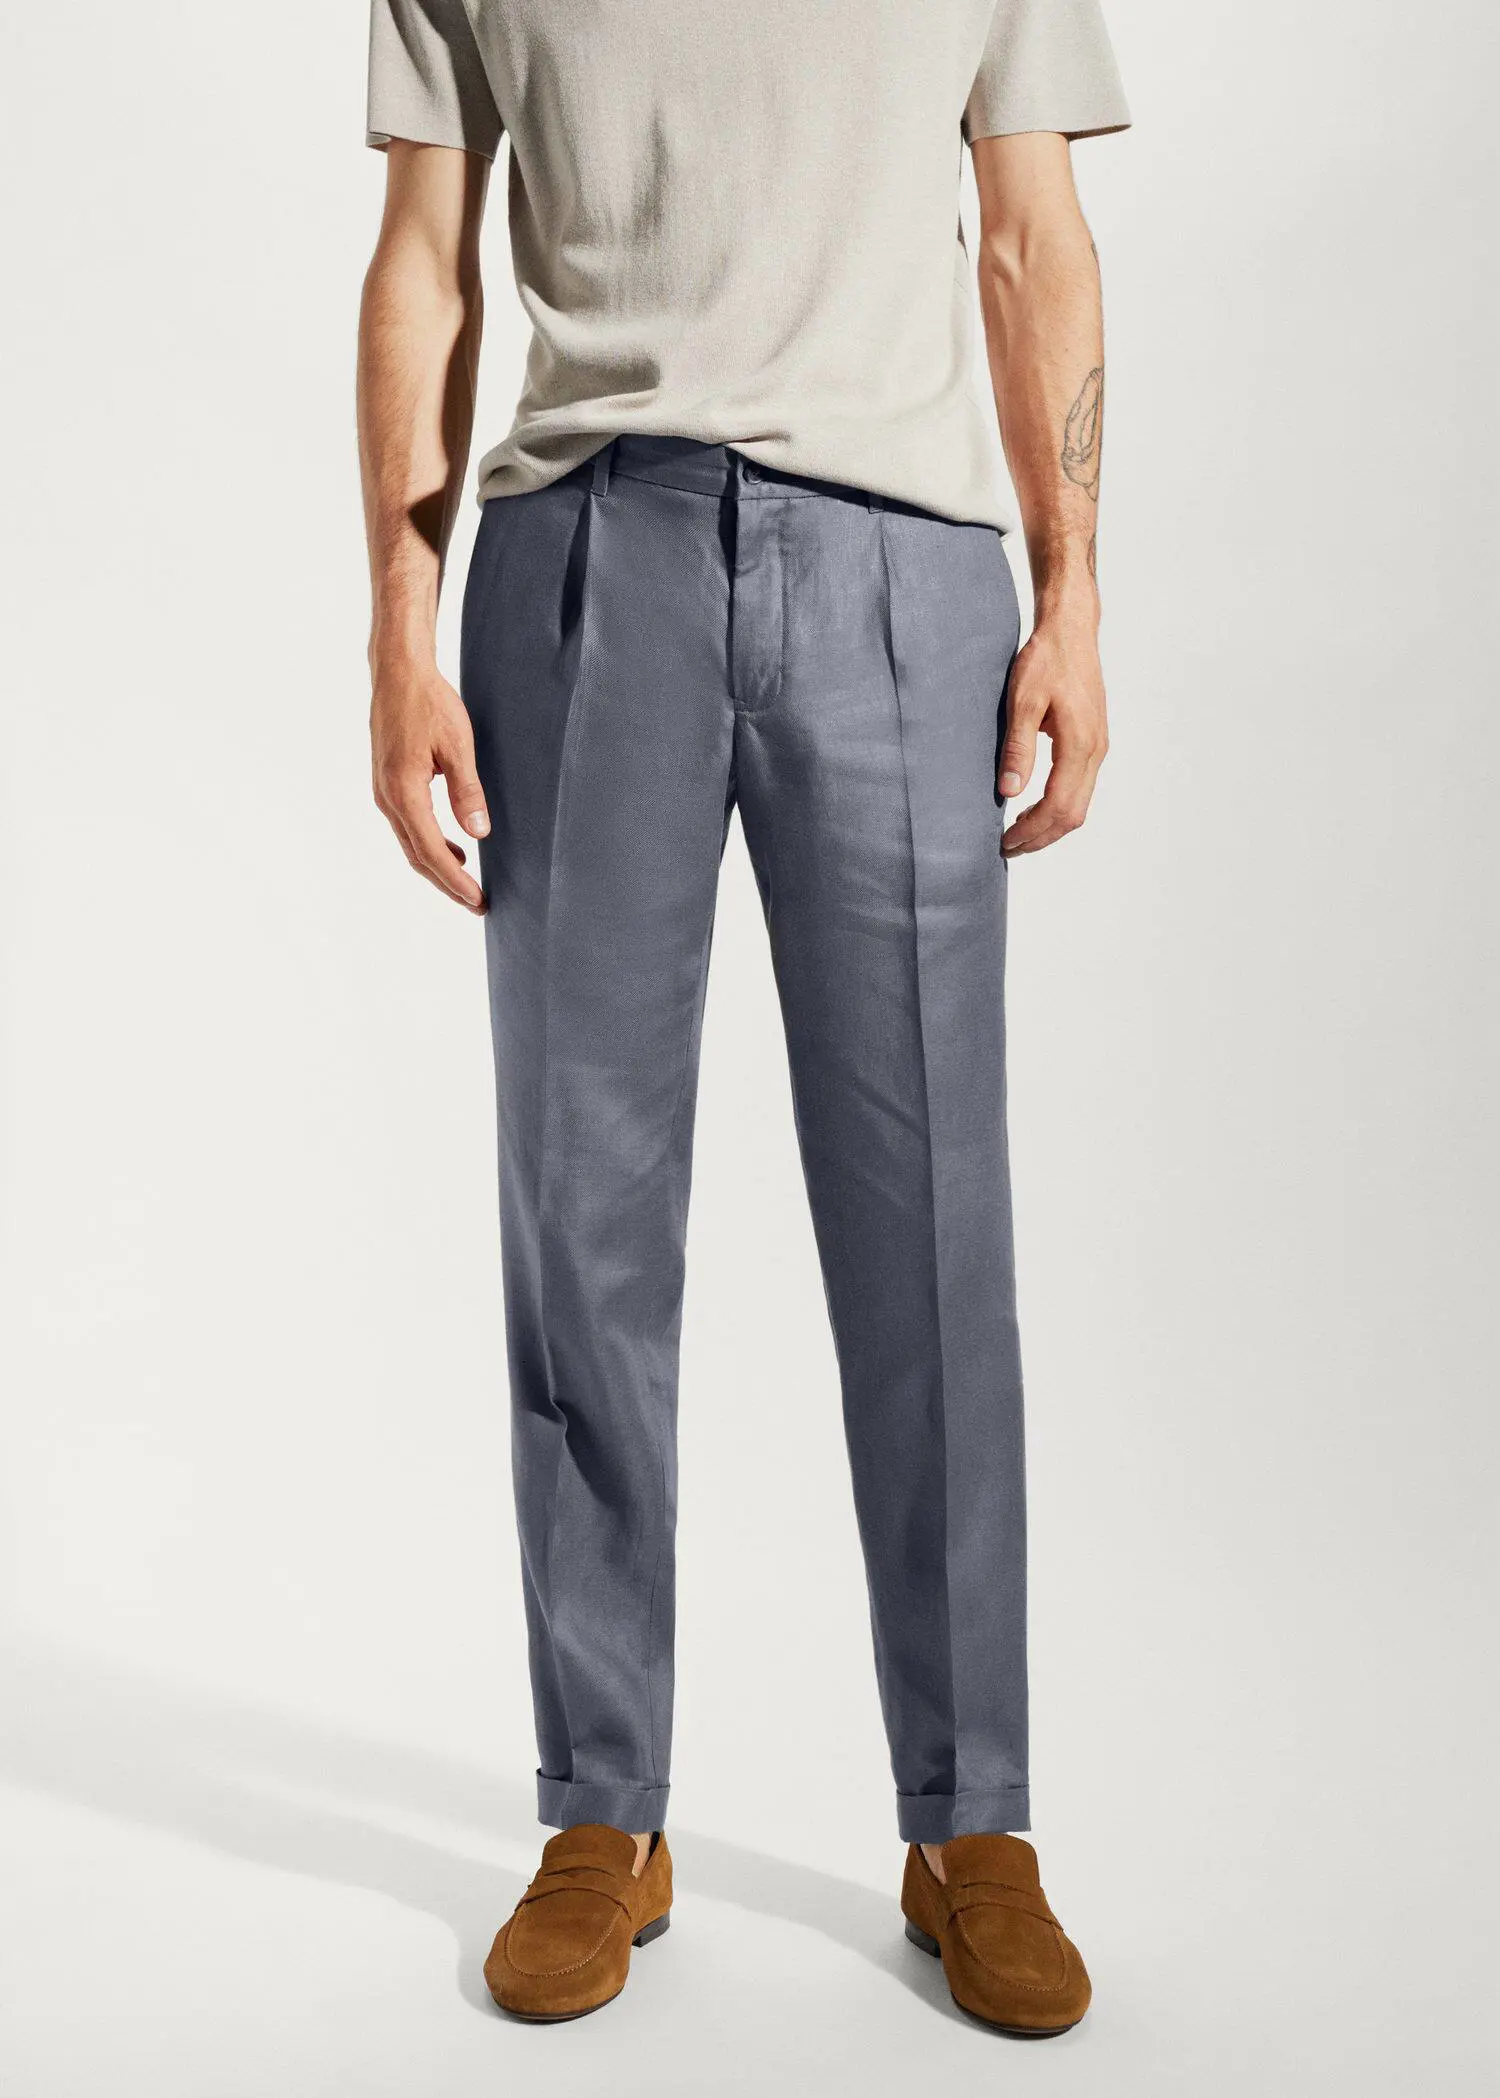 Mango 100% linen regular-fit pants. a man standing in front of a white wall. 